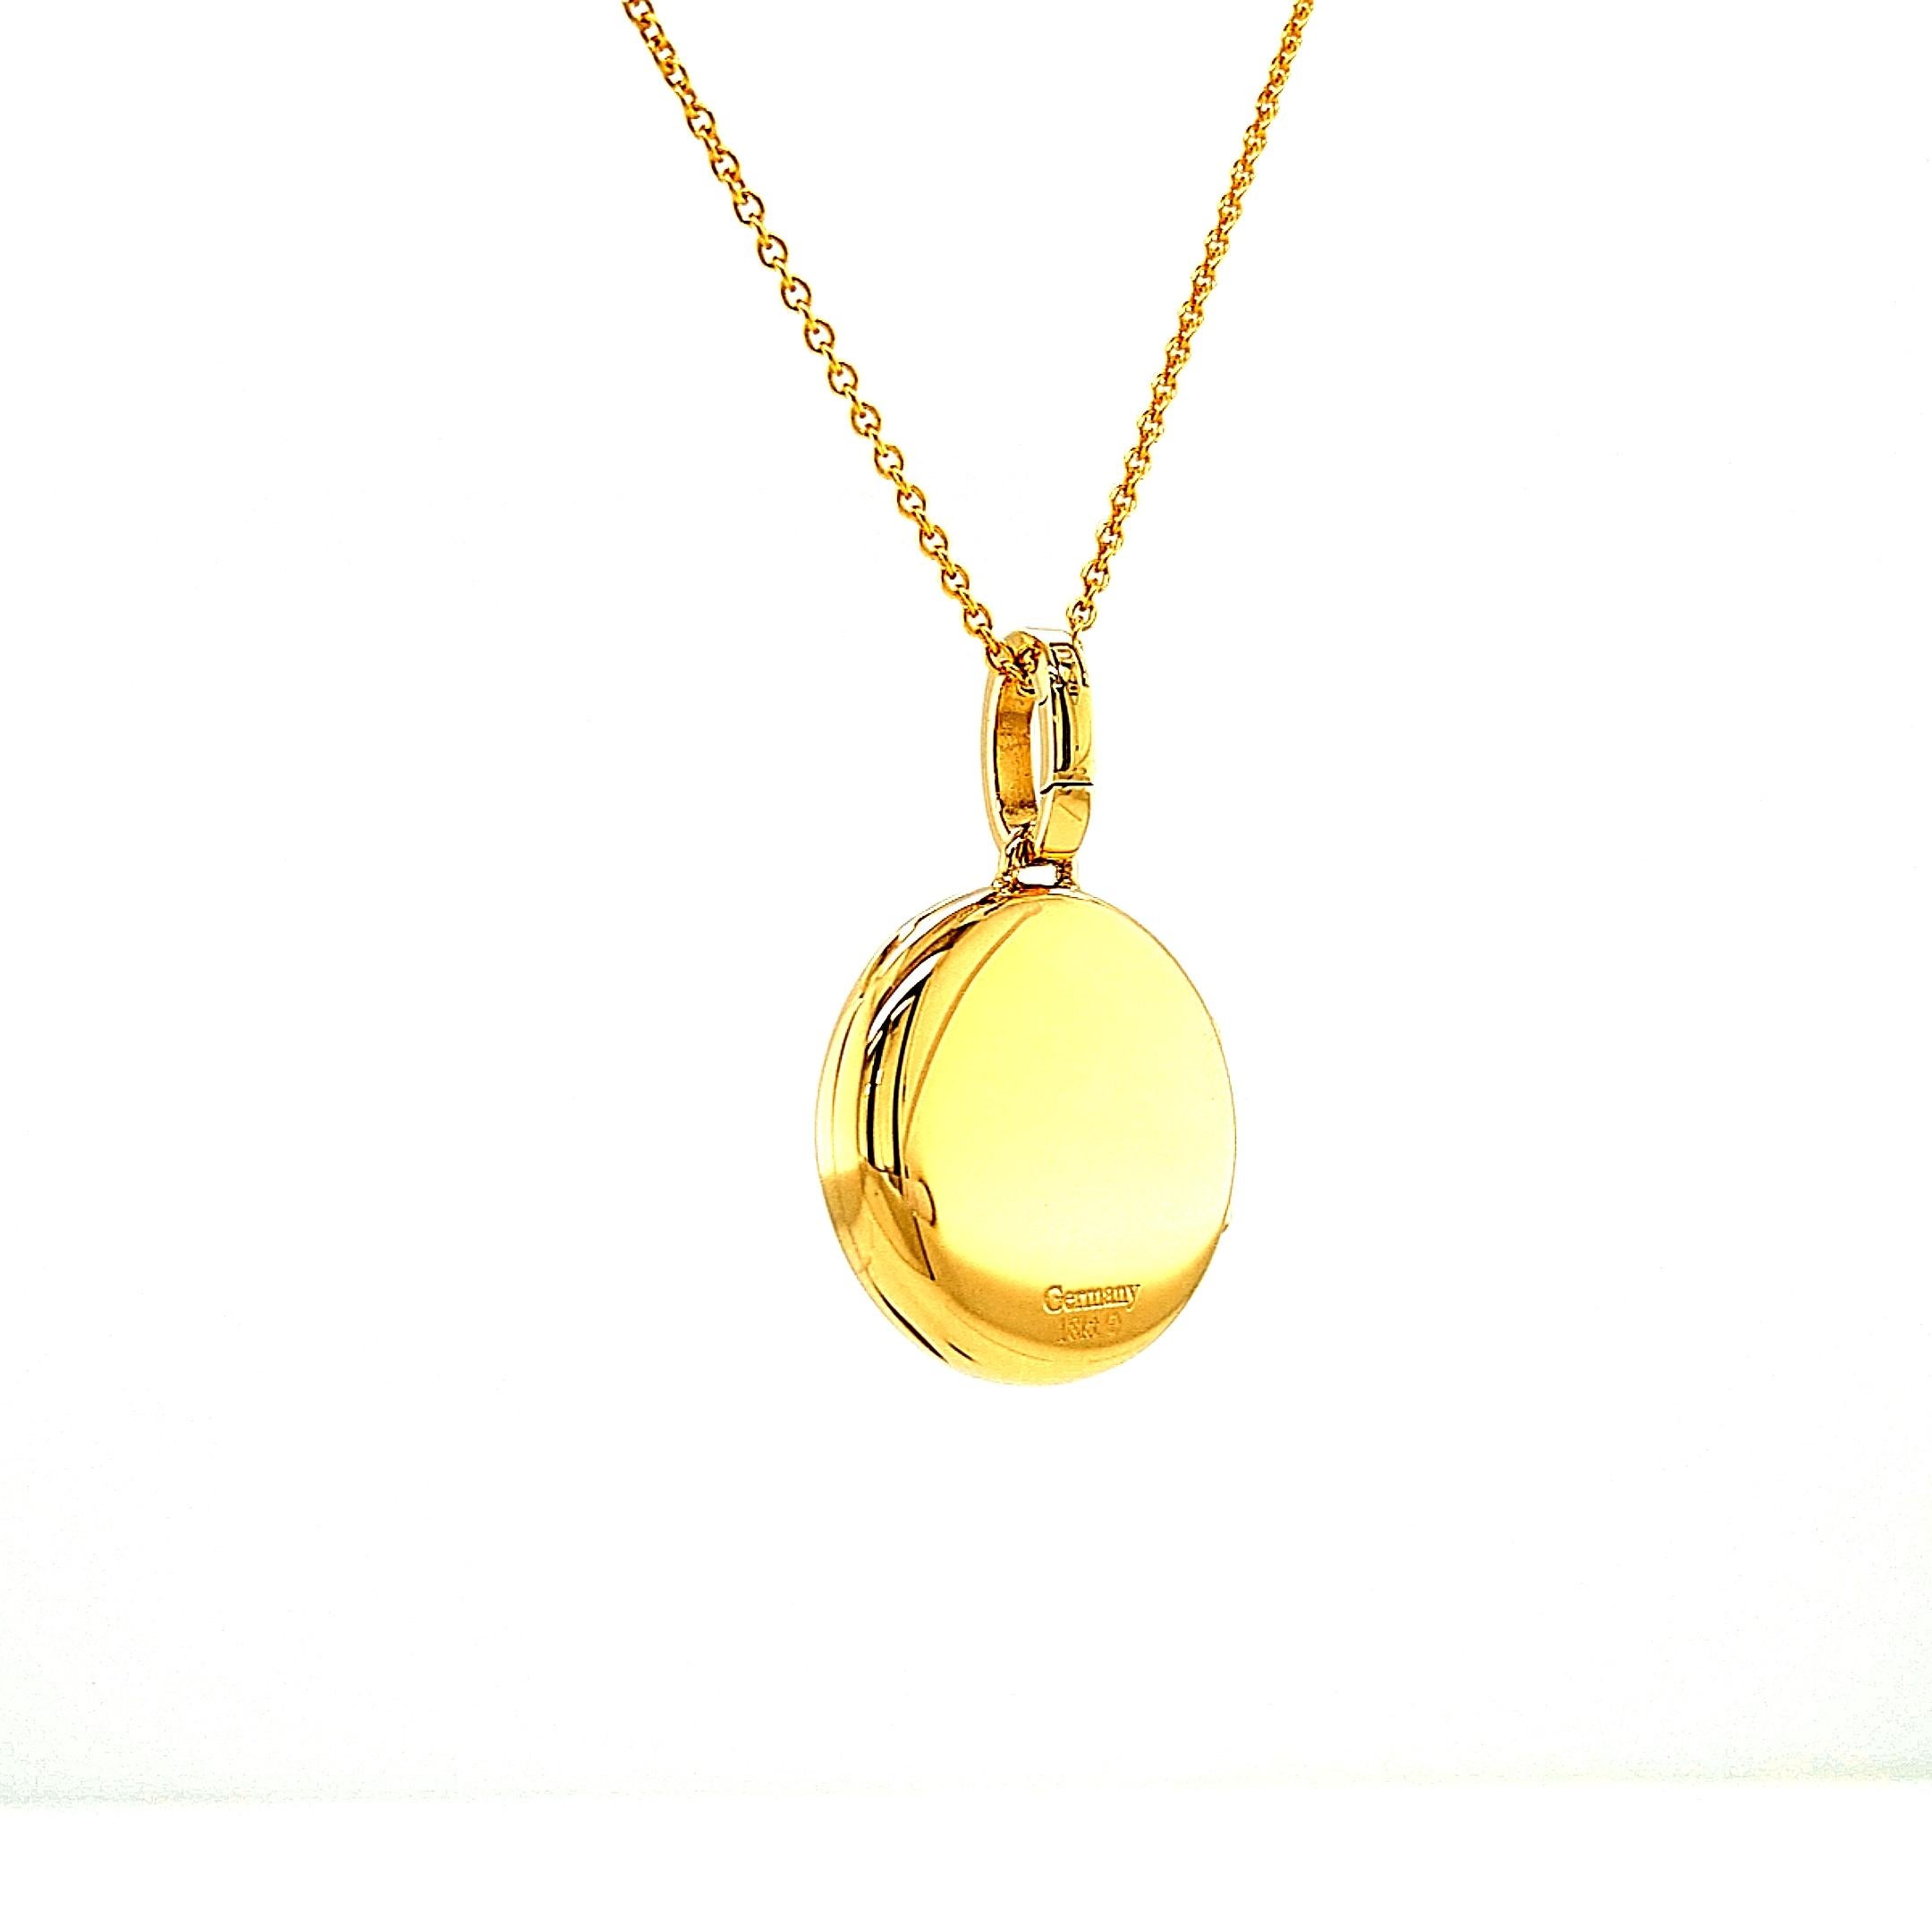 Customizable Round Polished Pendant Locket - 18k Yellow Gold - Diameter 26.0 mm In New Condition For Sale In Pforzheim, DE